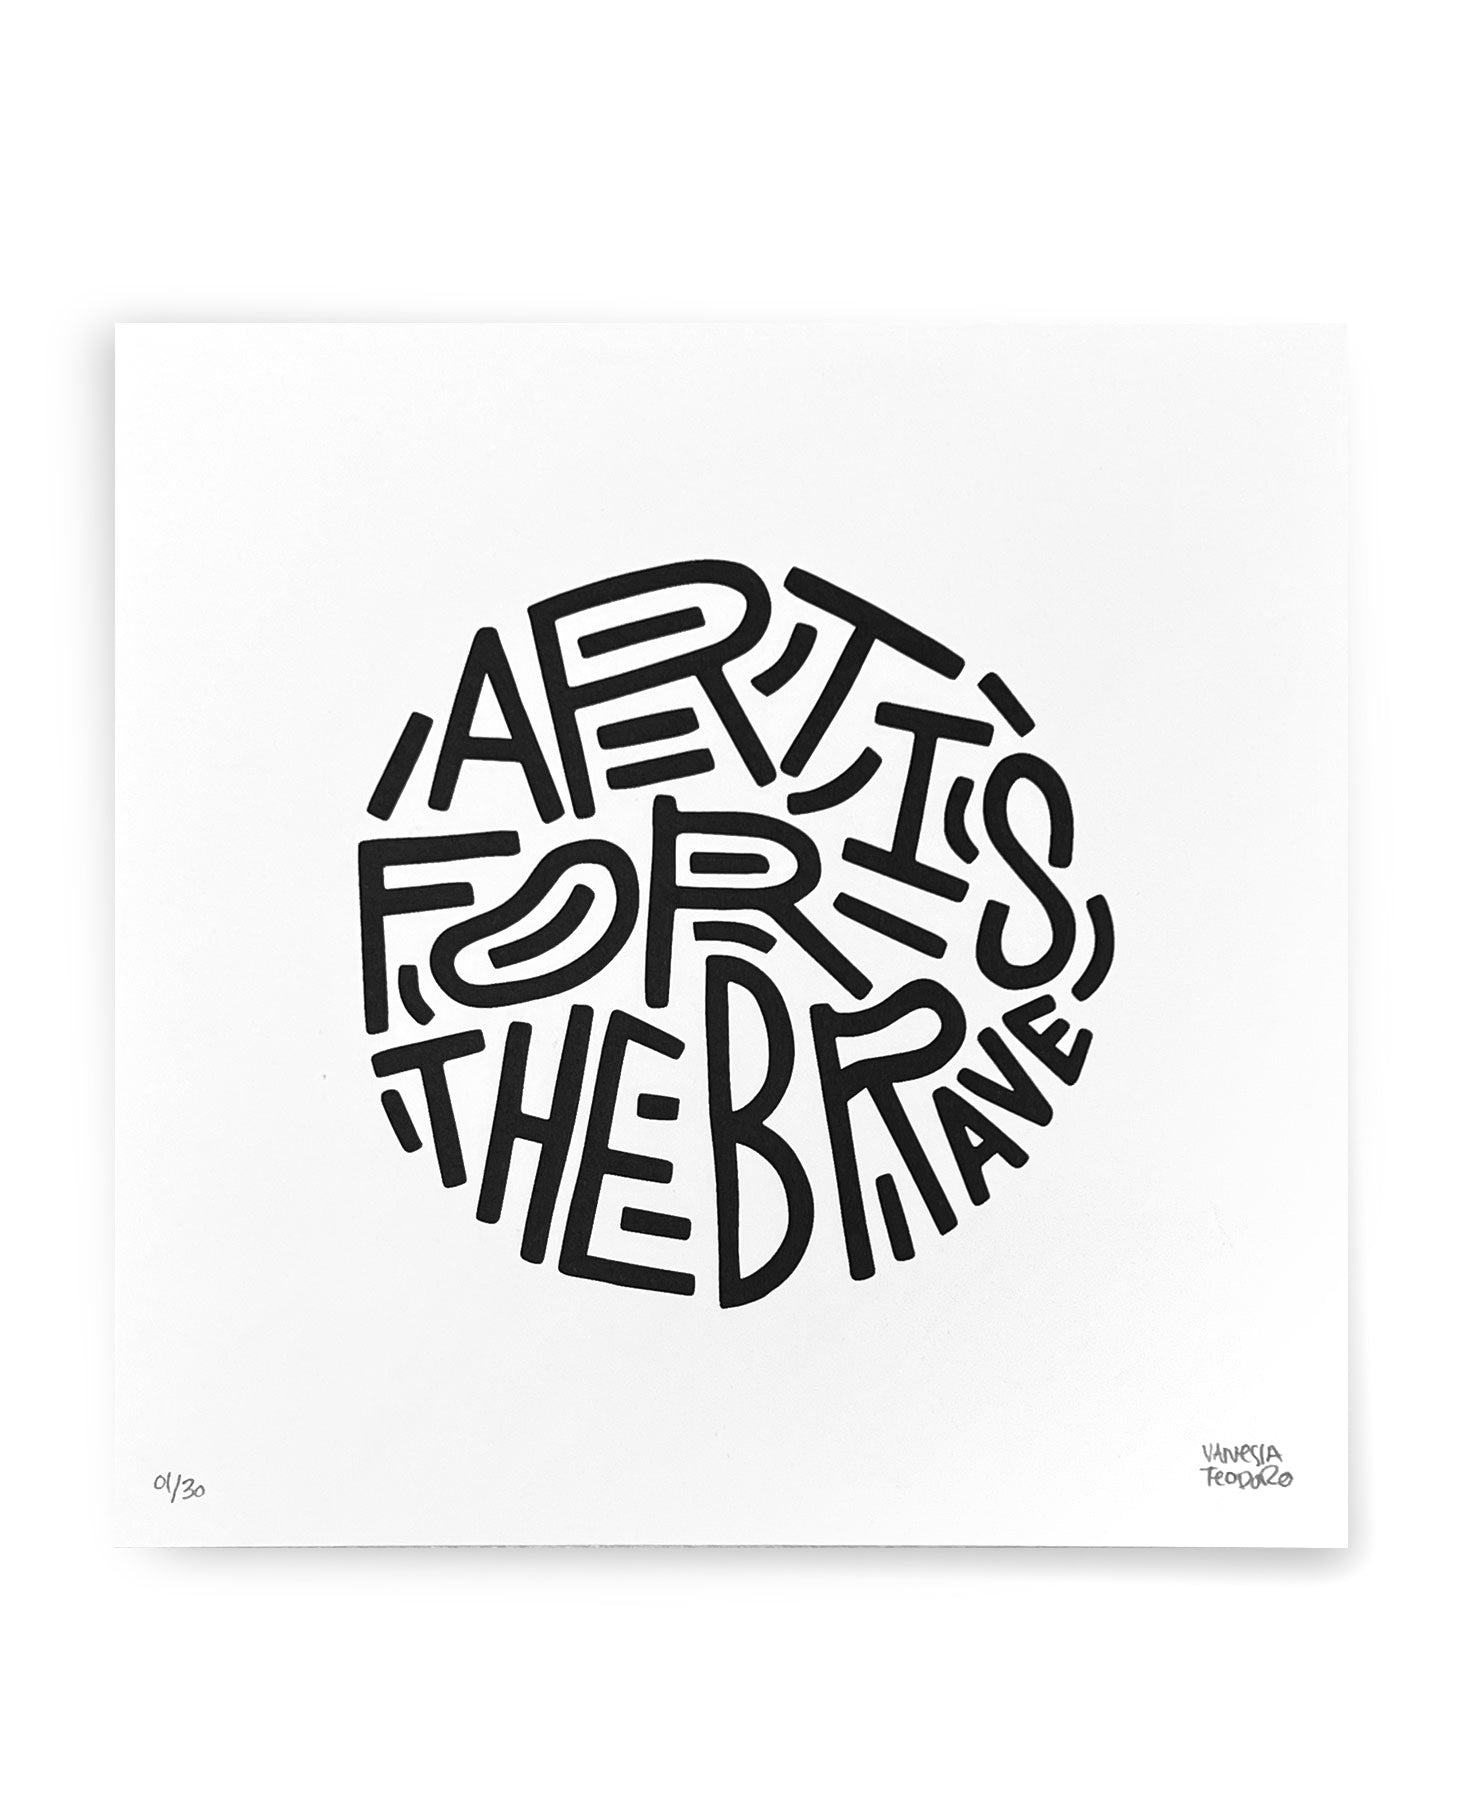 Art Is For The Brave by Vanessa Teodoro